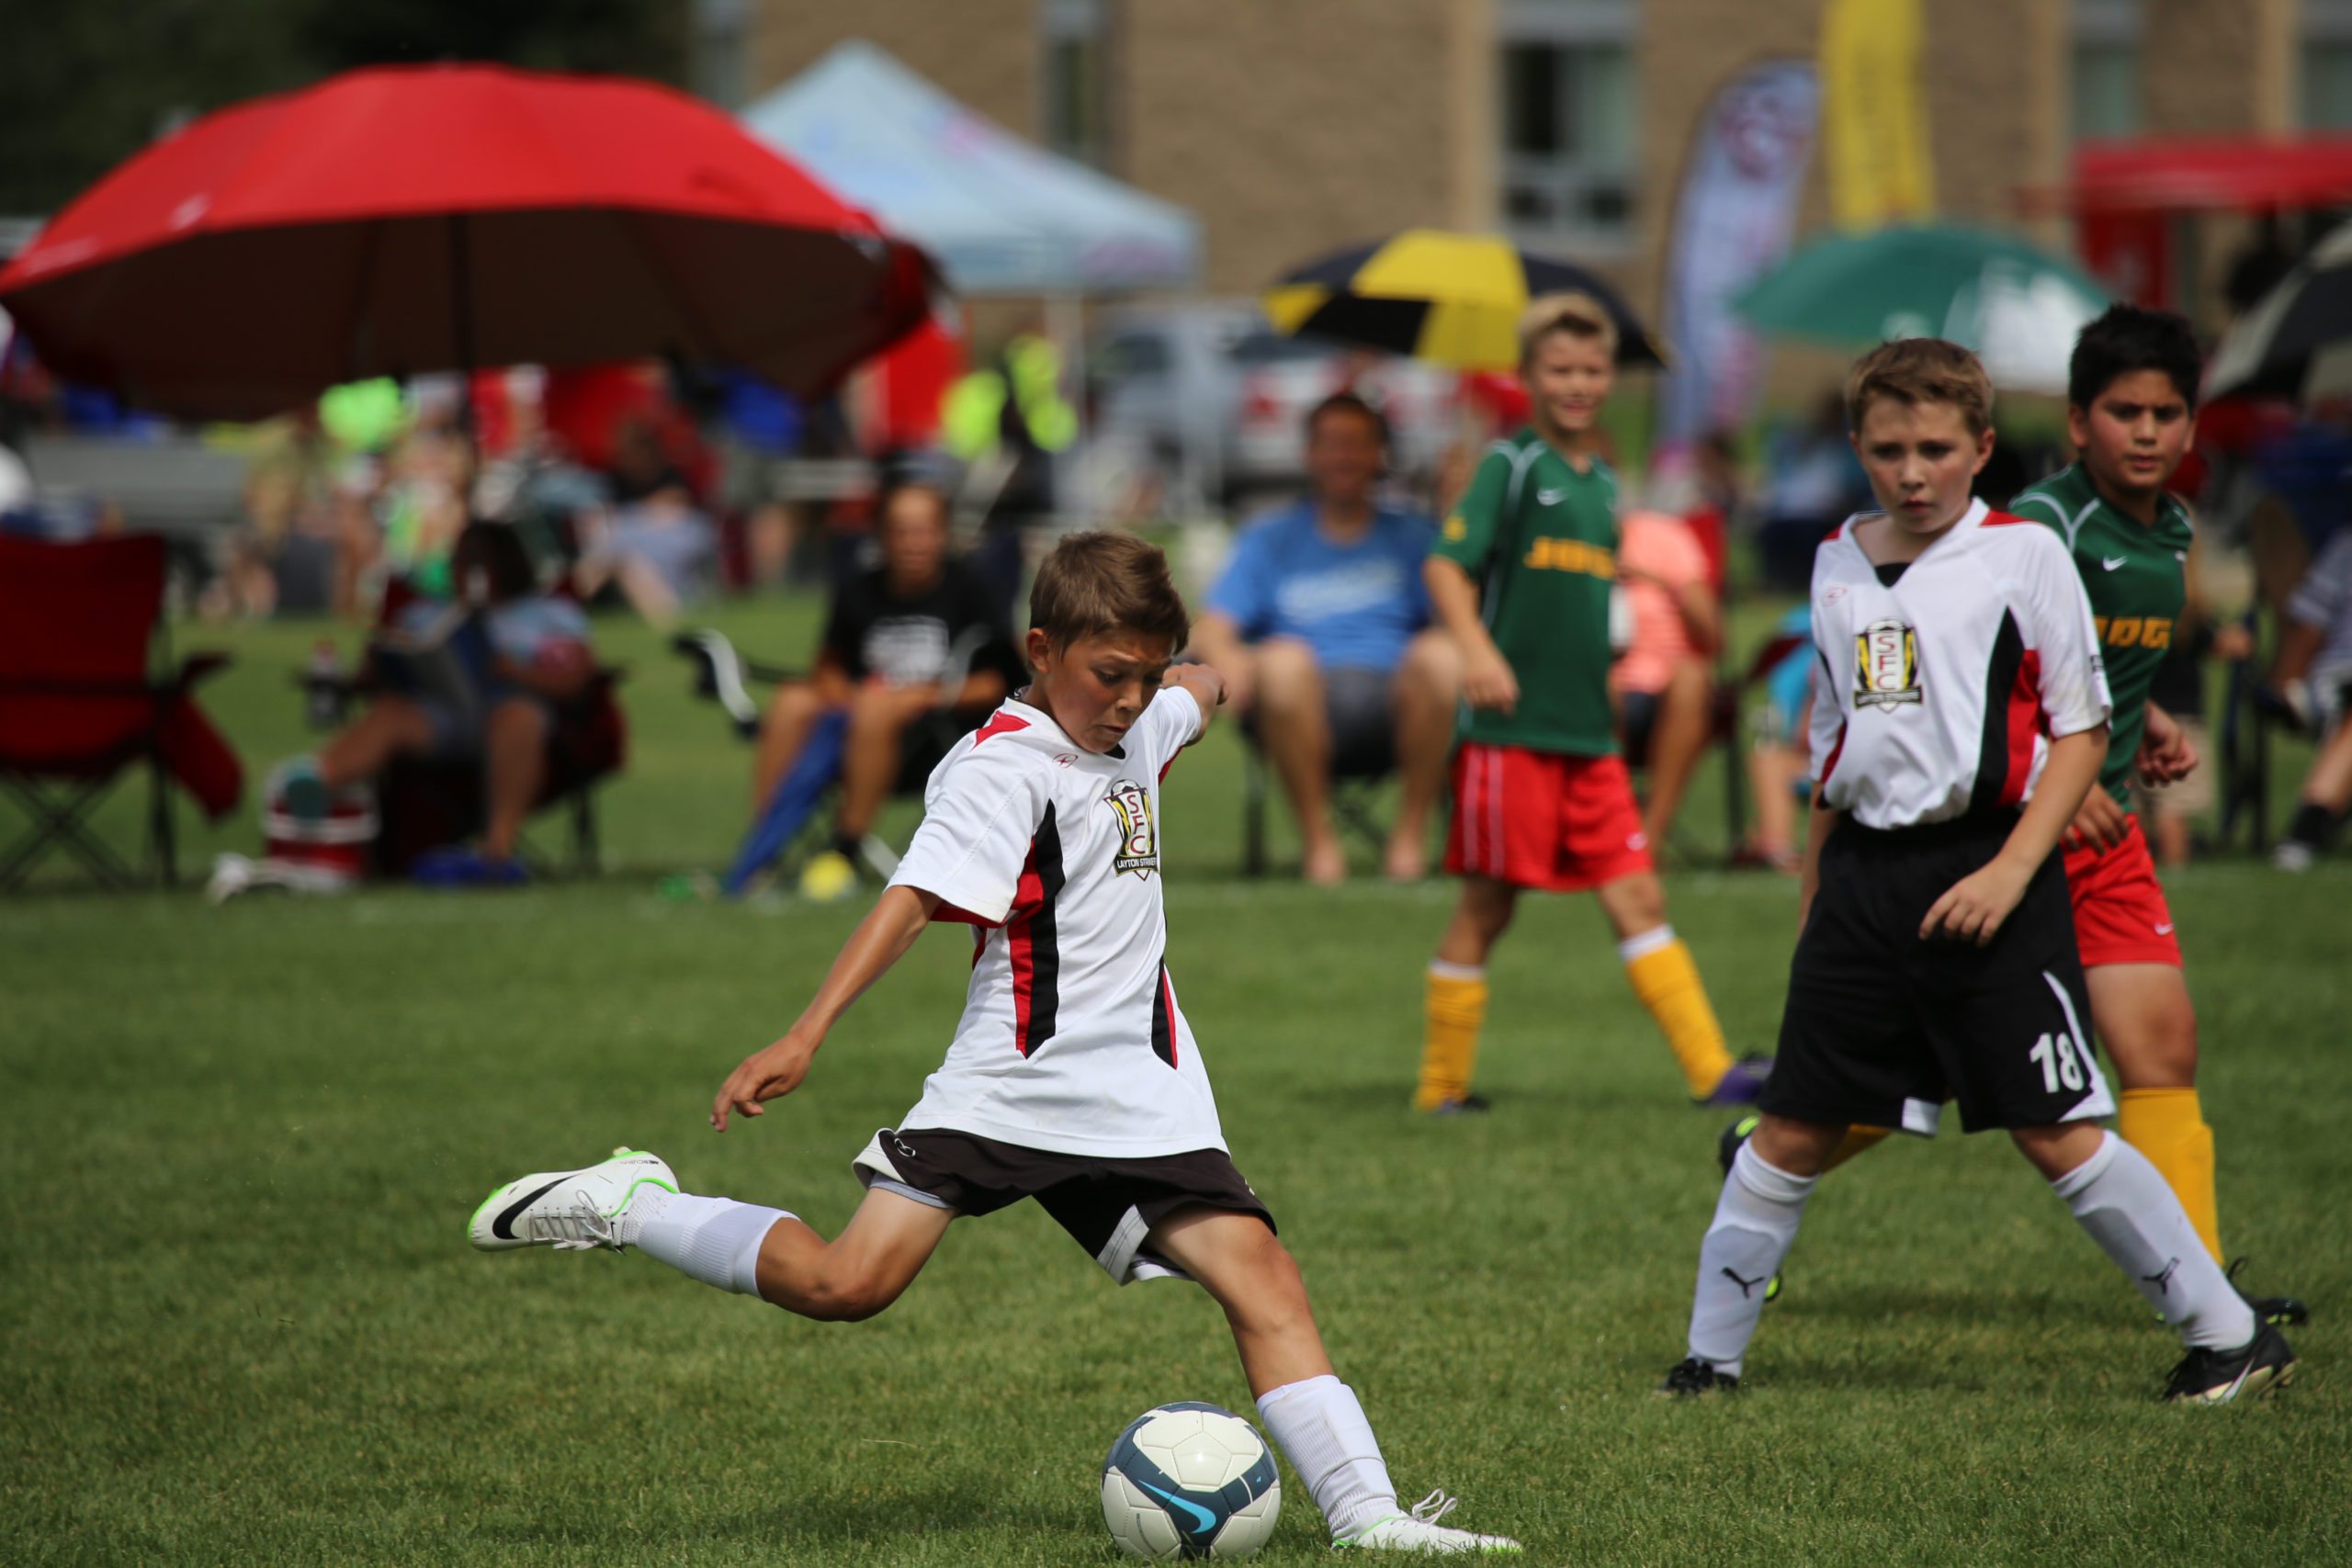 Park City Soccer Club hosts the extremely popular Extreme Cup